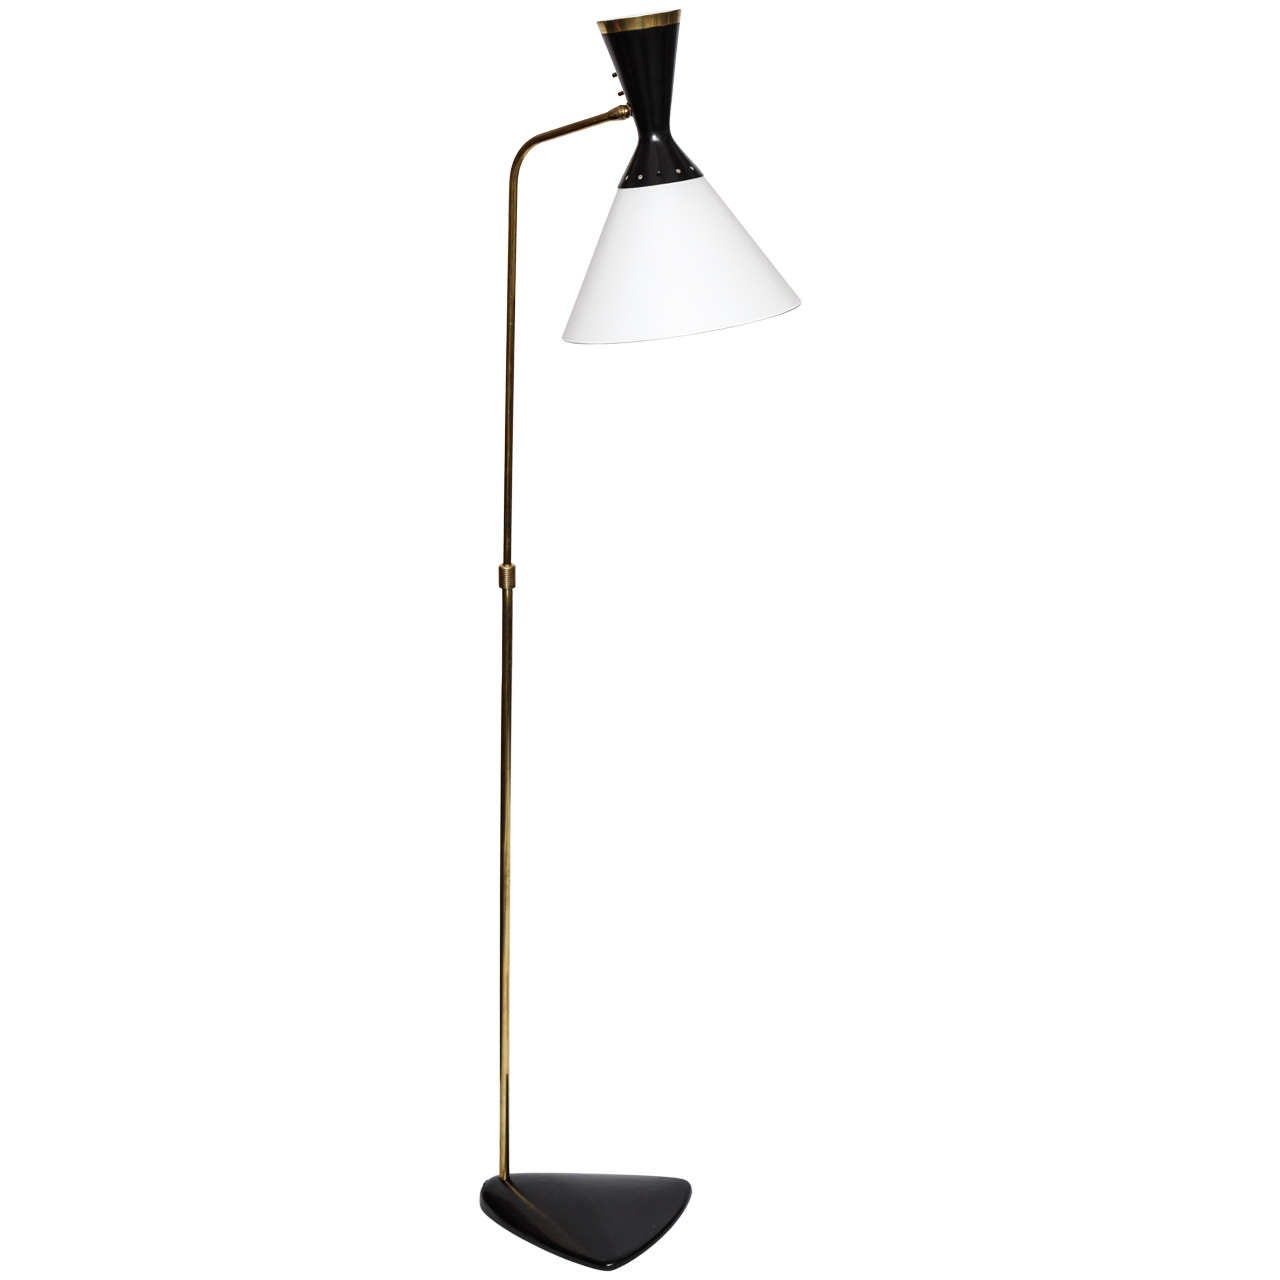  Boris Lacroix Articulated Floor Lamp Mid Century Modern France 1950's For Sale